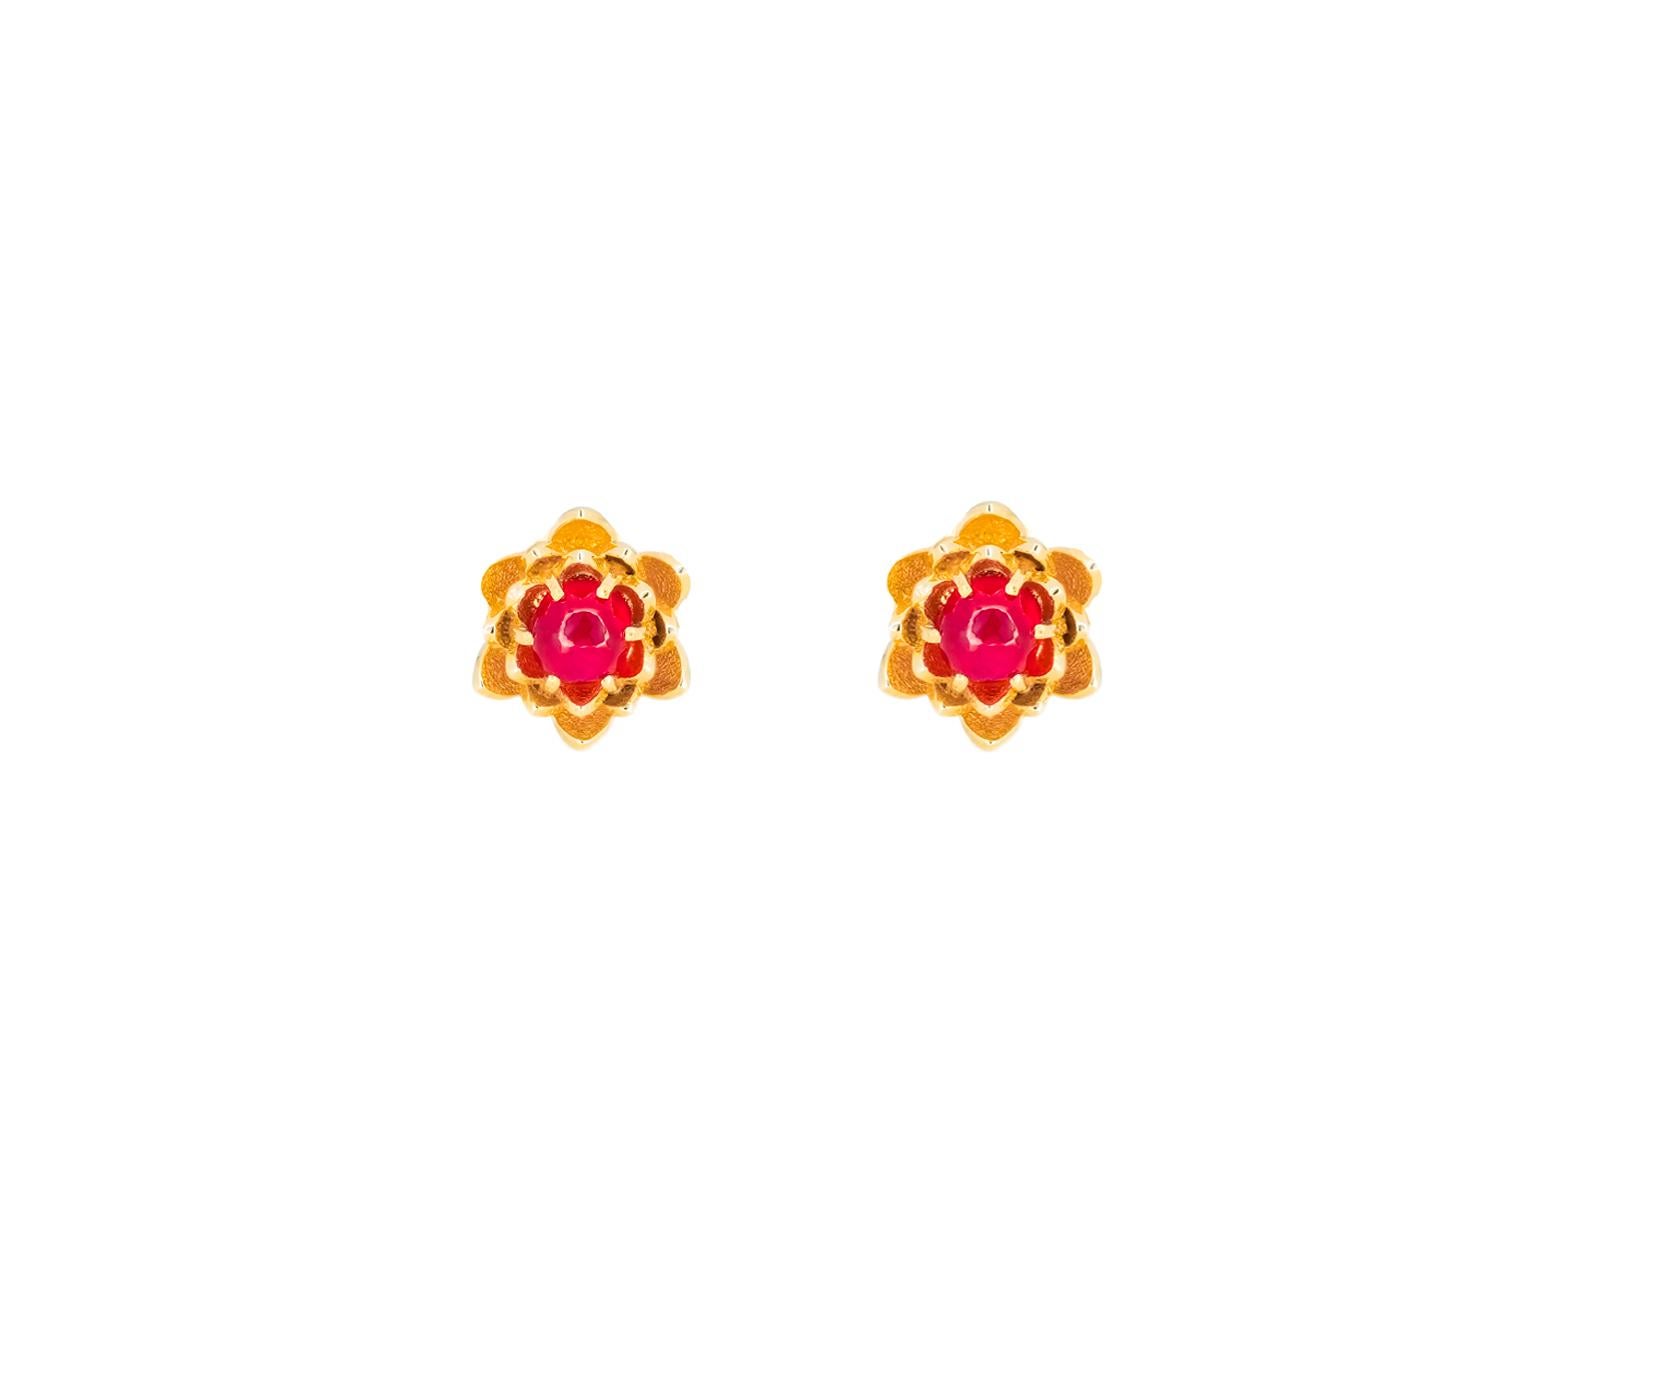 Cabochon Lotus earrings studs with rubies in 14k gold. For Sale